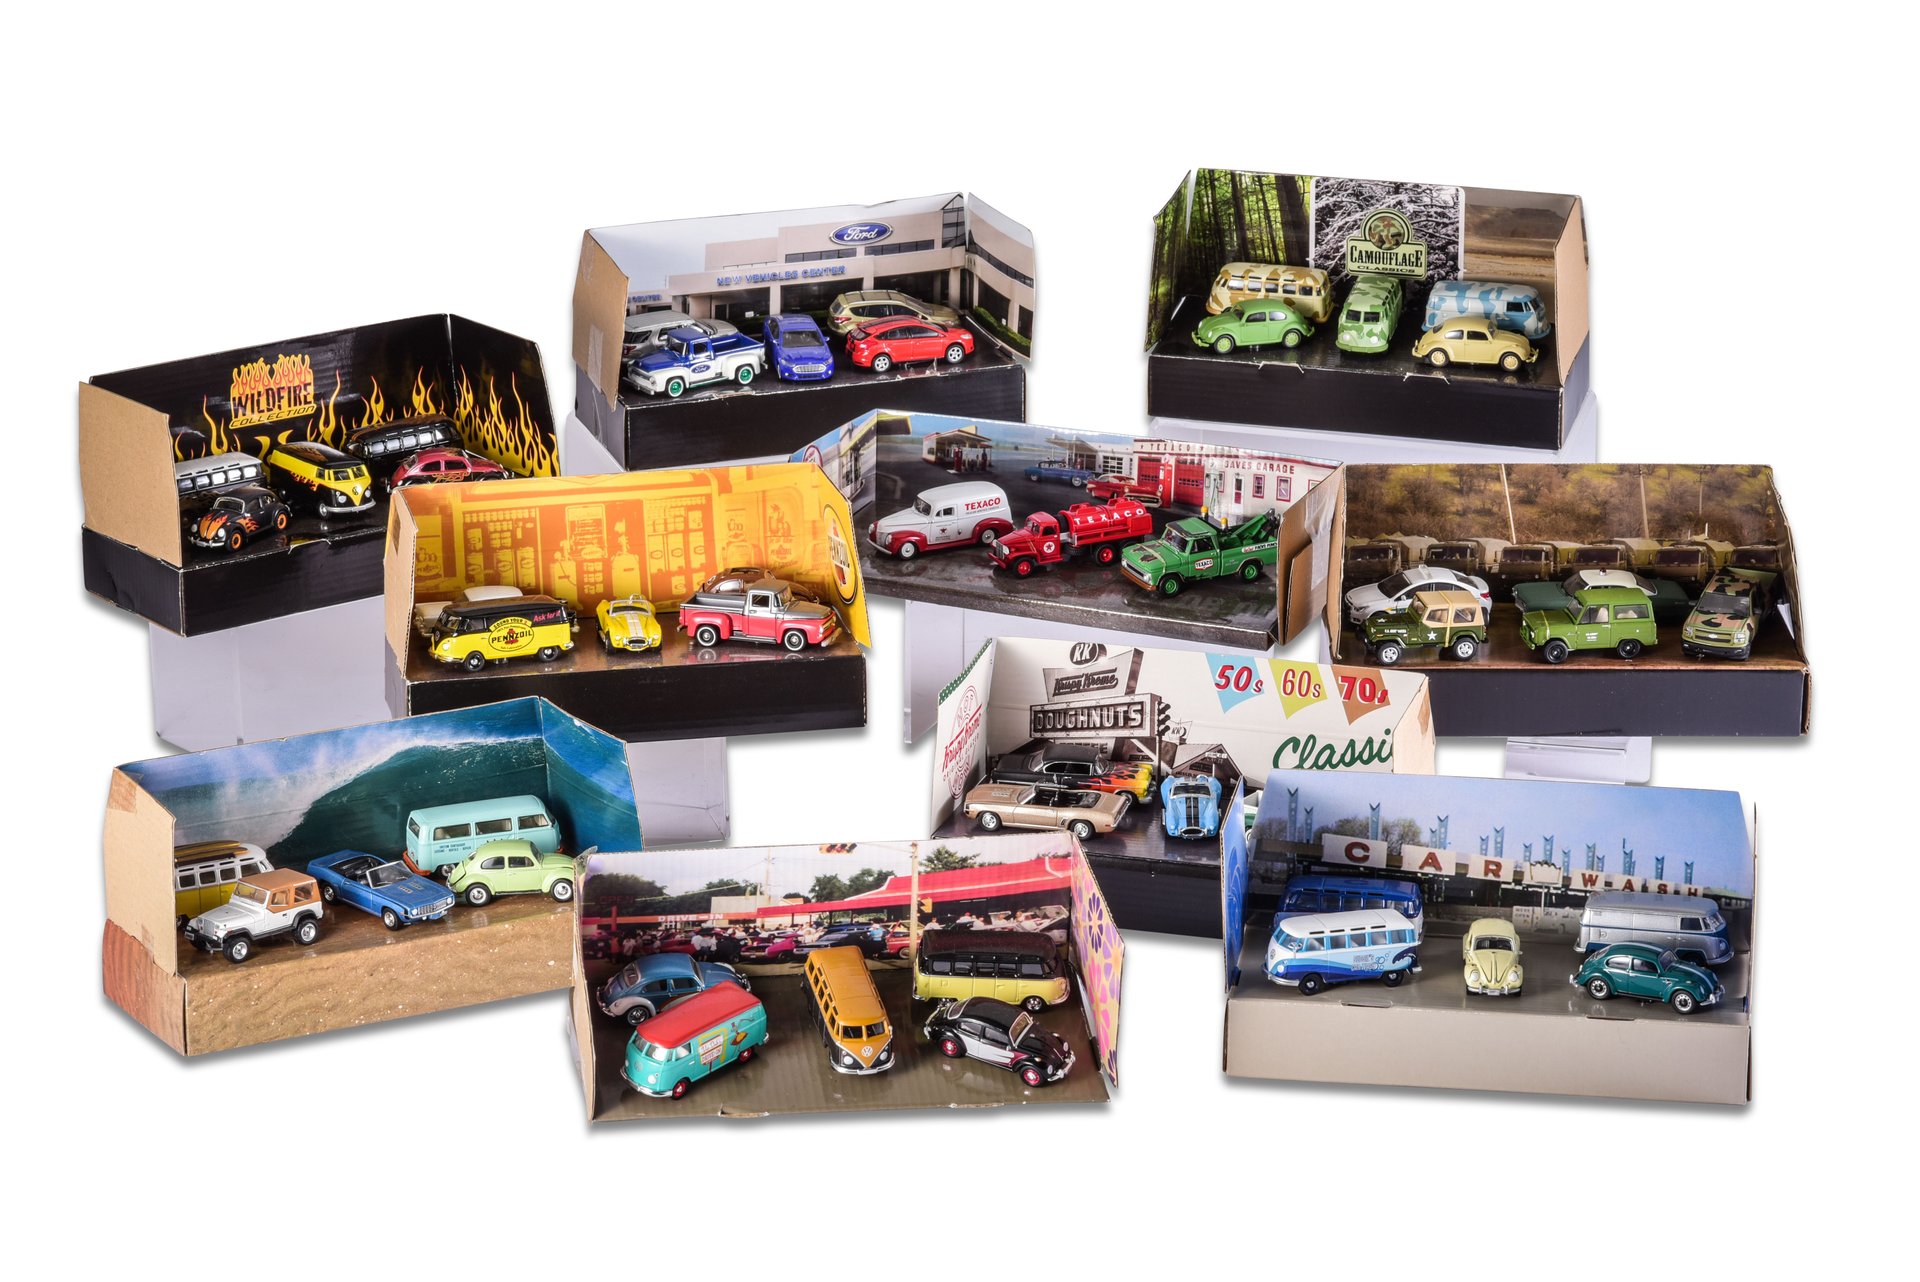 Broad Arrow Auctions | Group of Cars Models in Cutout Box Displays